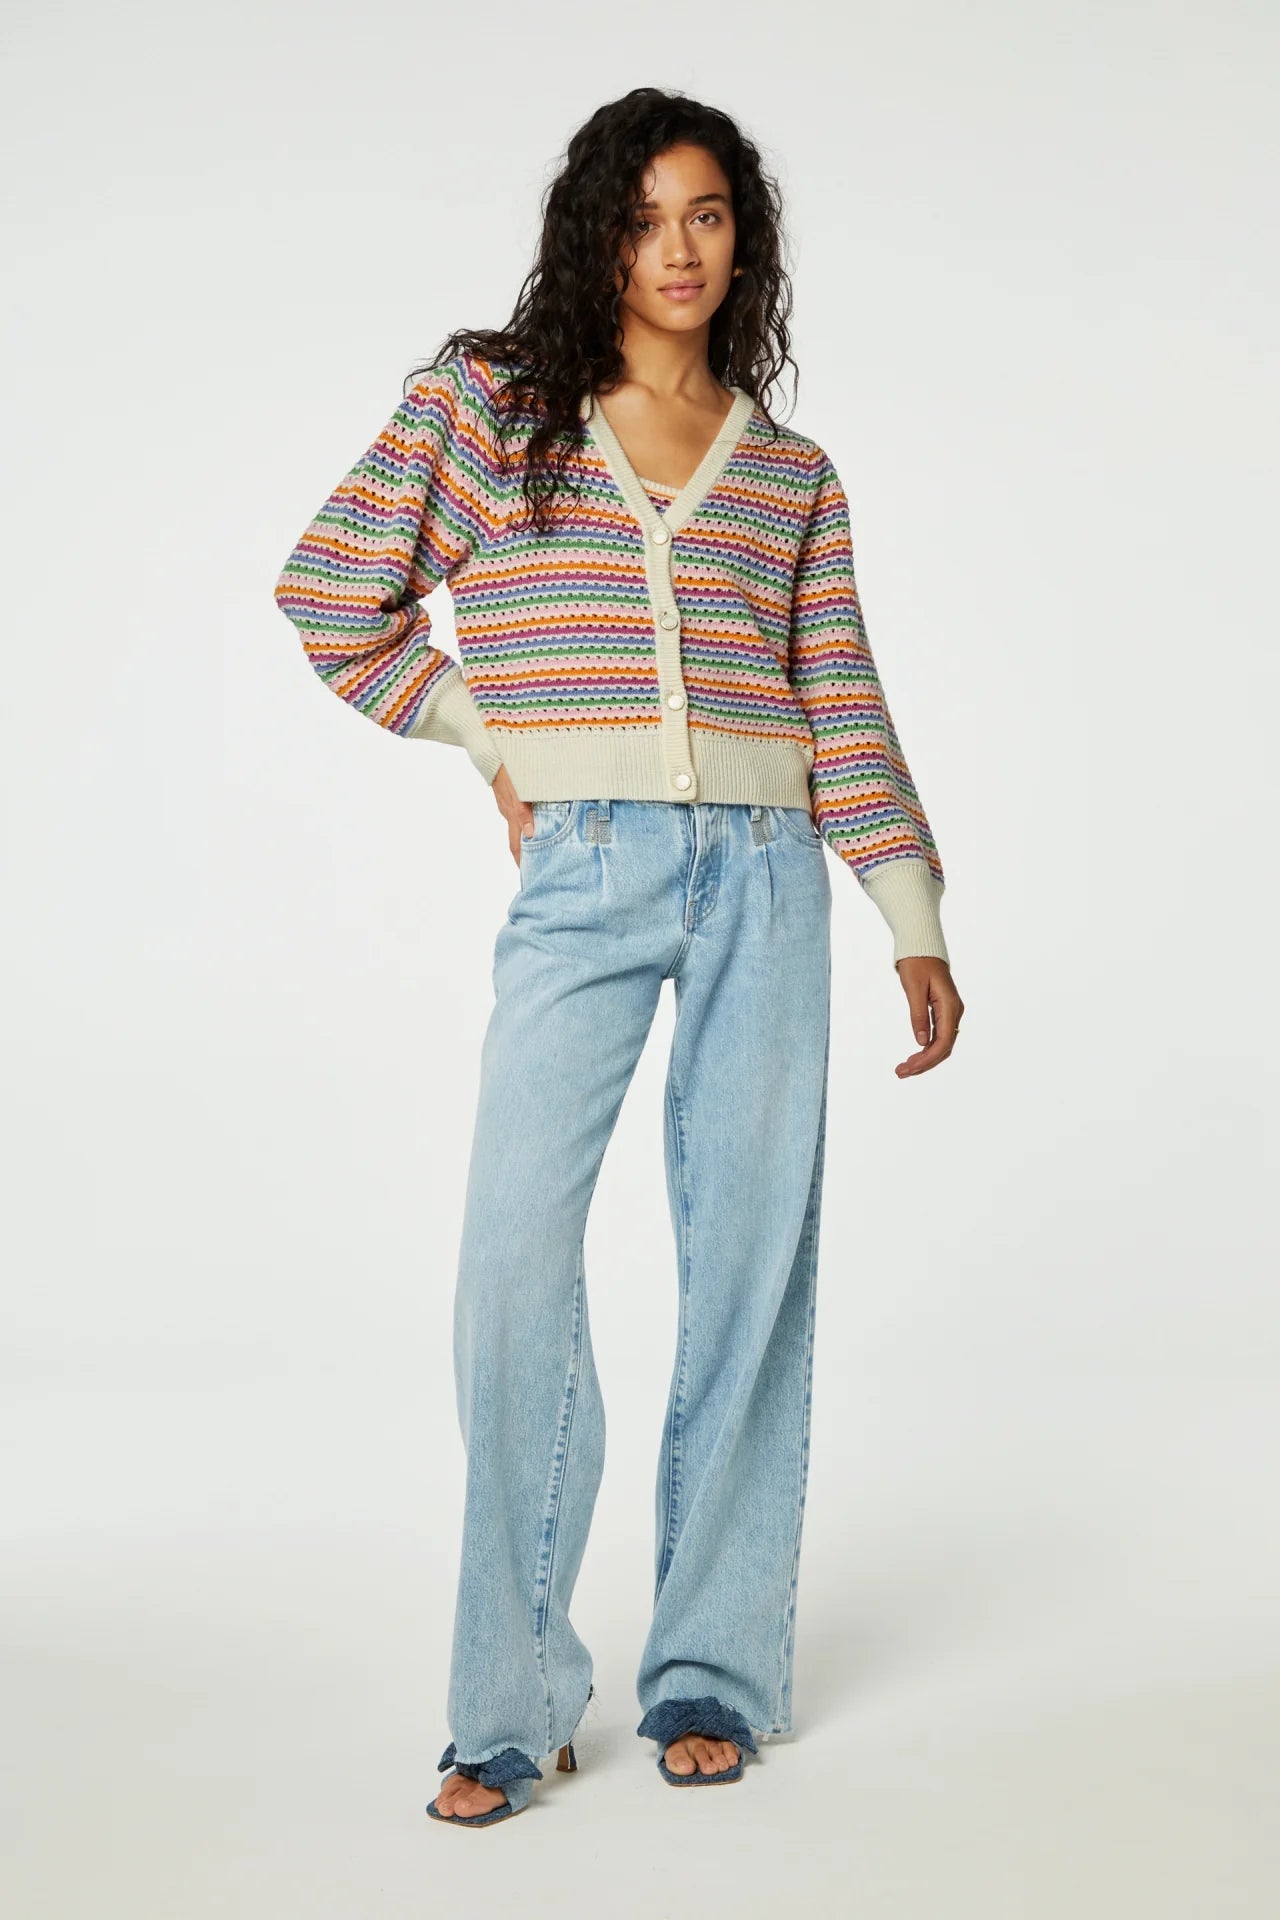 A woman models a colorful striped Fabienne Chapot heather cardigan and blue jeans, standing against a plain background.